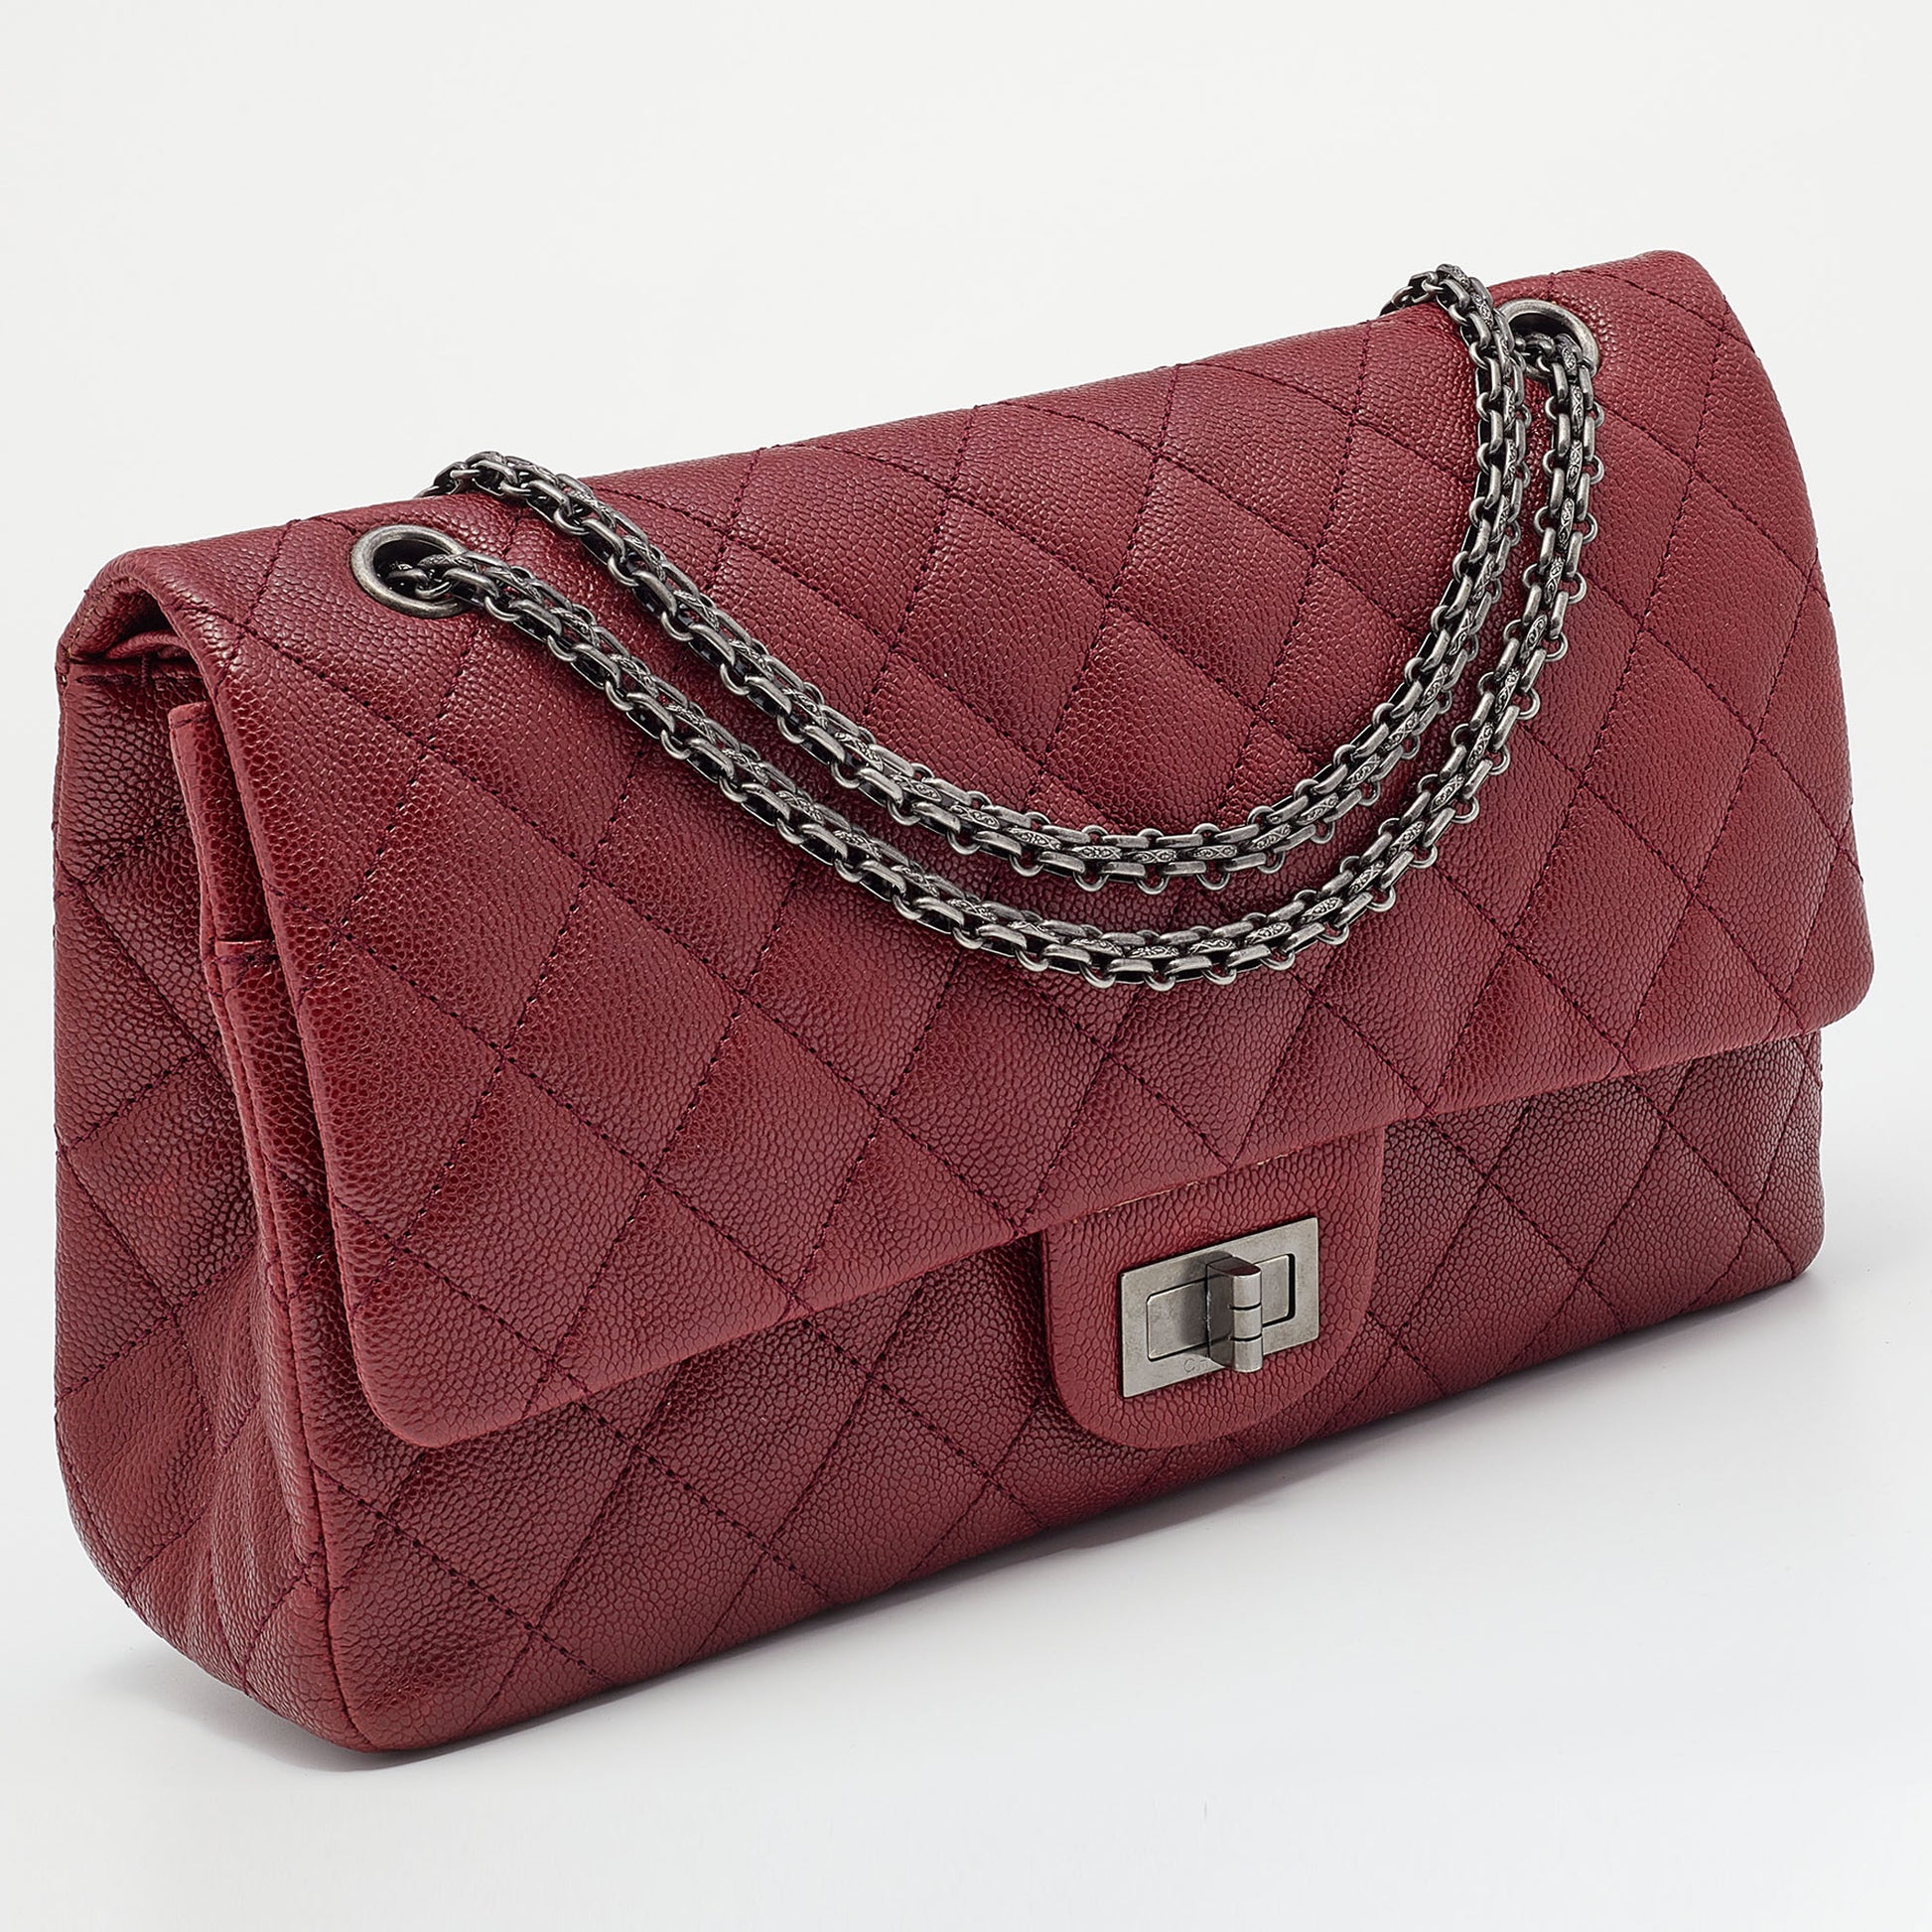 Chanel 10C Red Caviar Maxi Quilted Classic 2.55 Jumbo XL Flap Bag